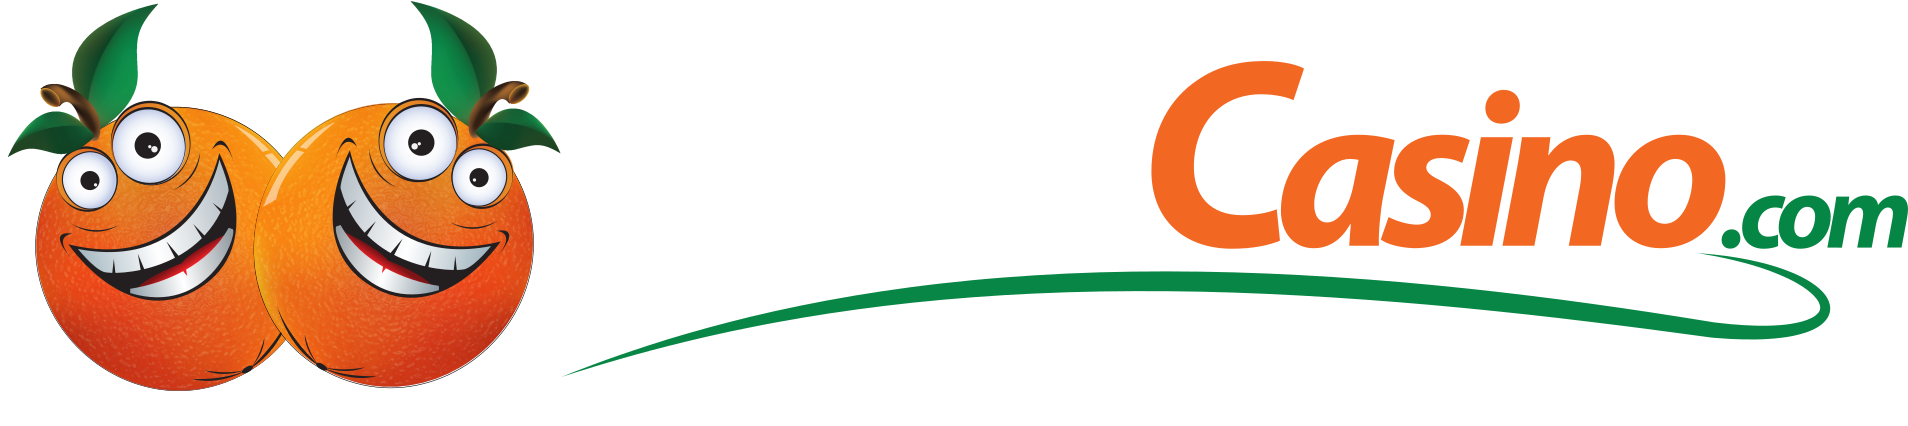 Casino as One of the Real Money Online Casinos with no deposit bonus